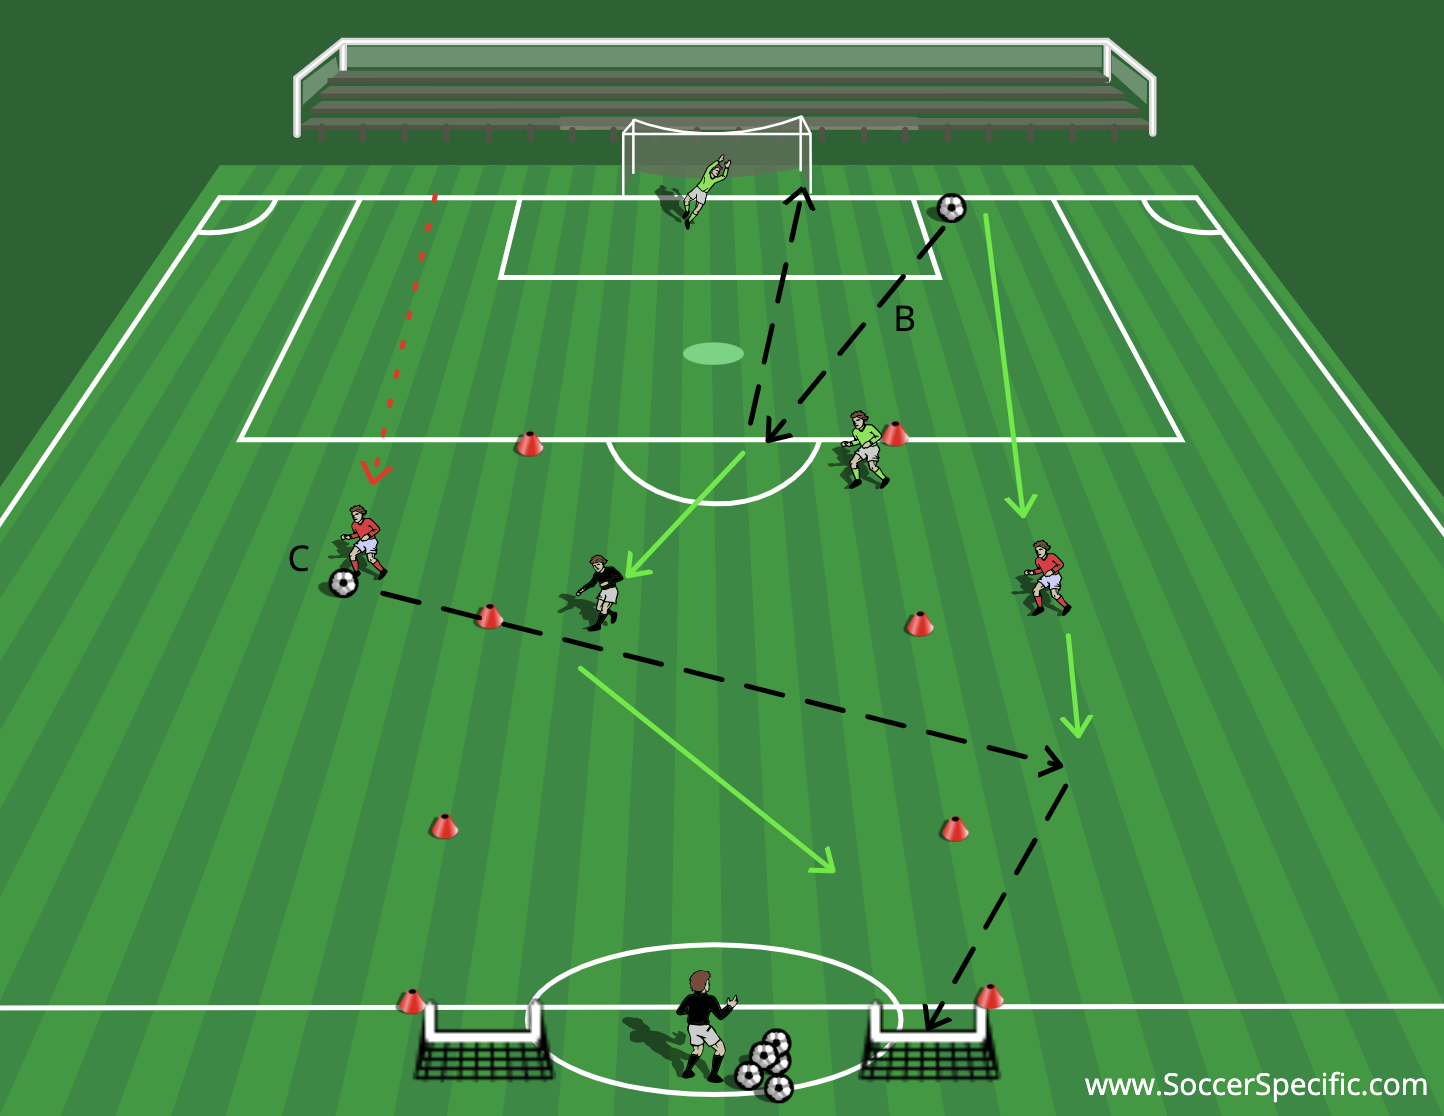 Position Specific Training | SoccerSpecific.com